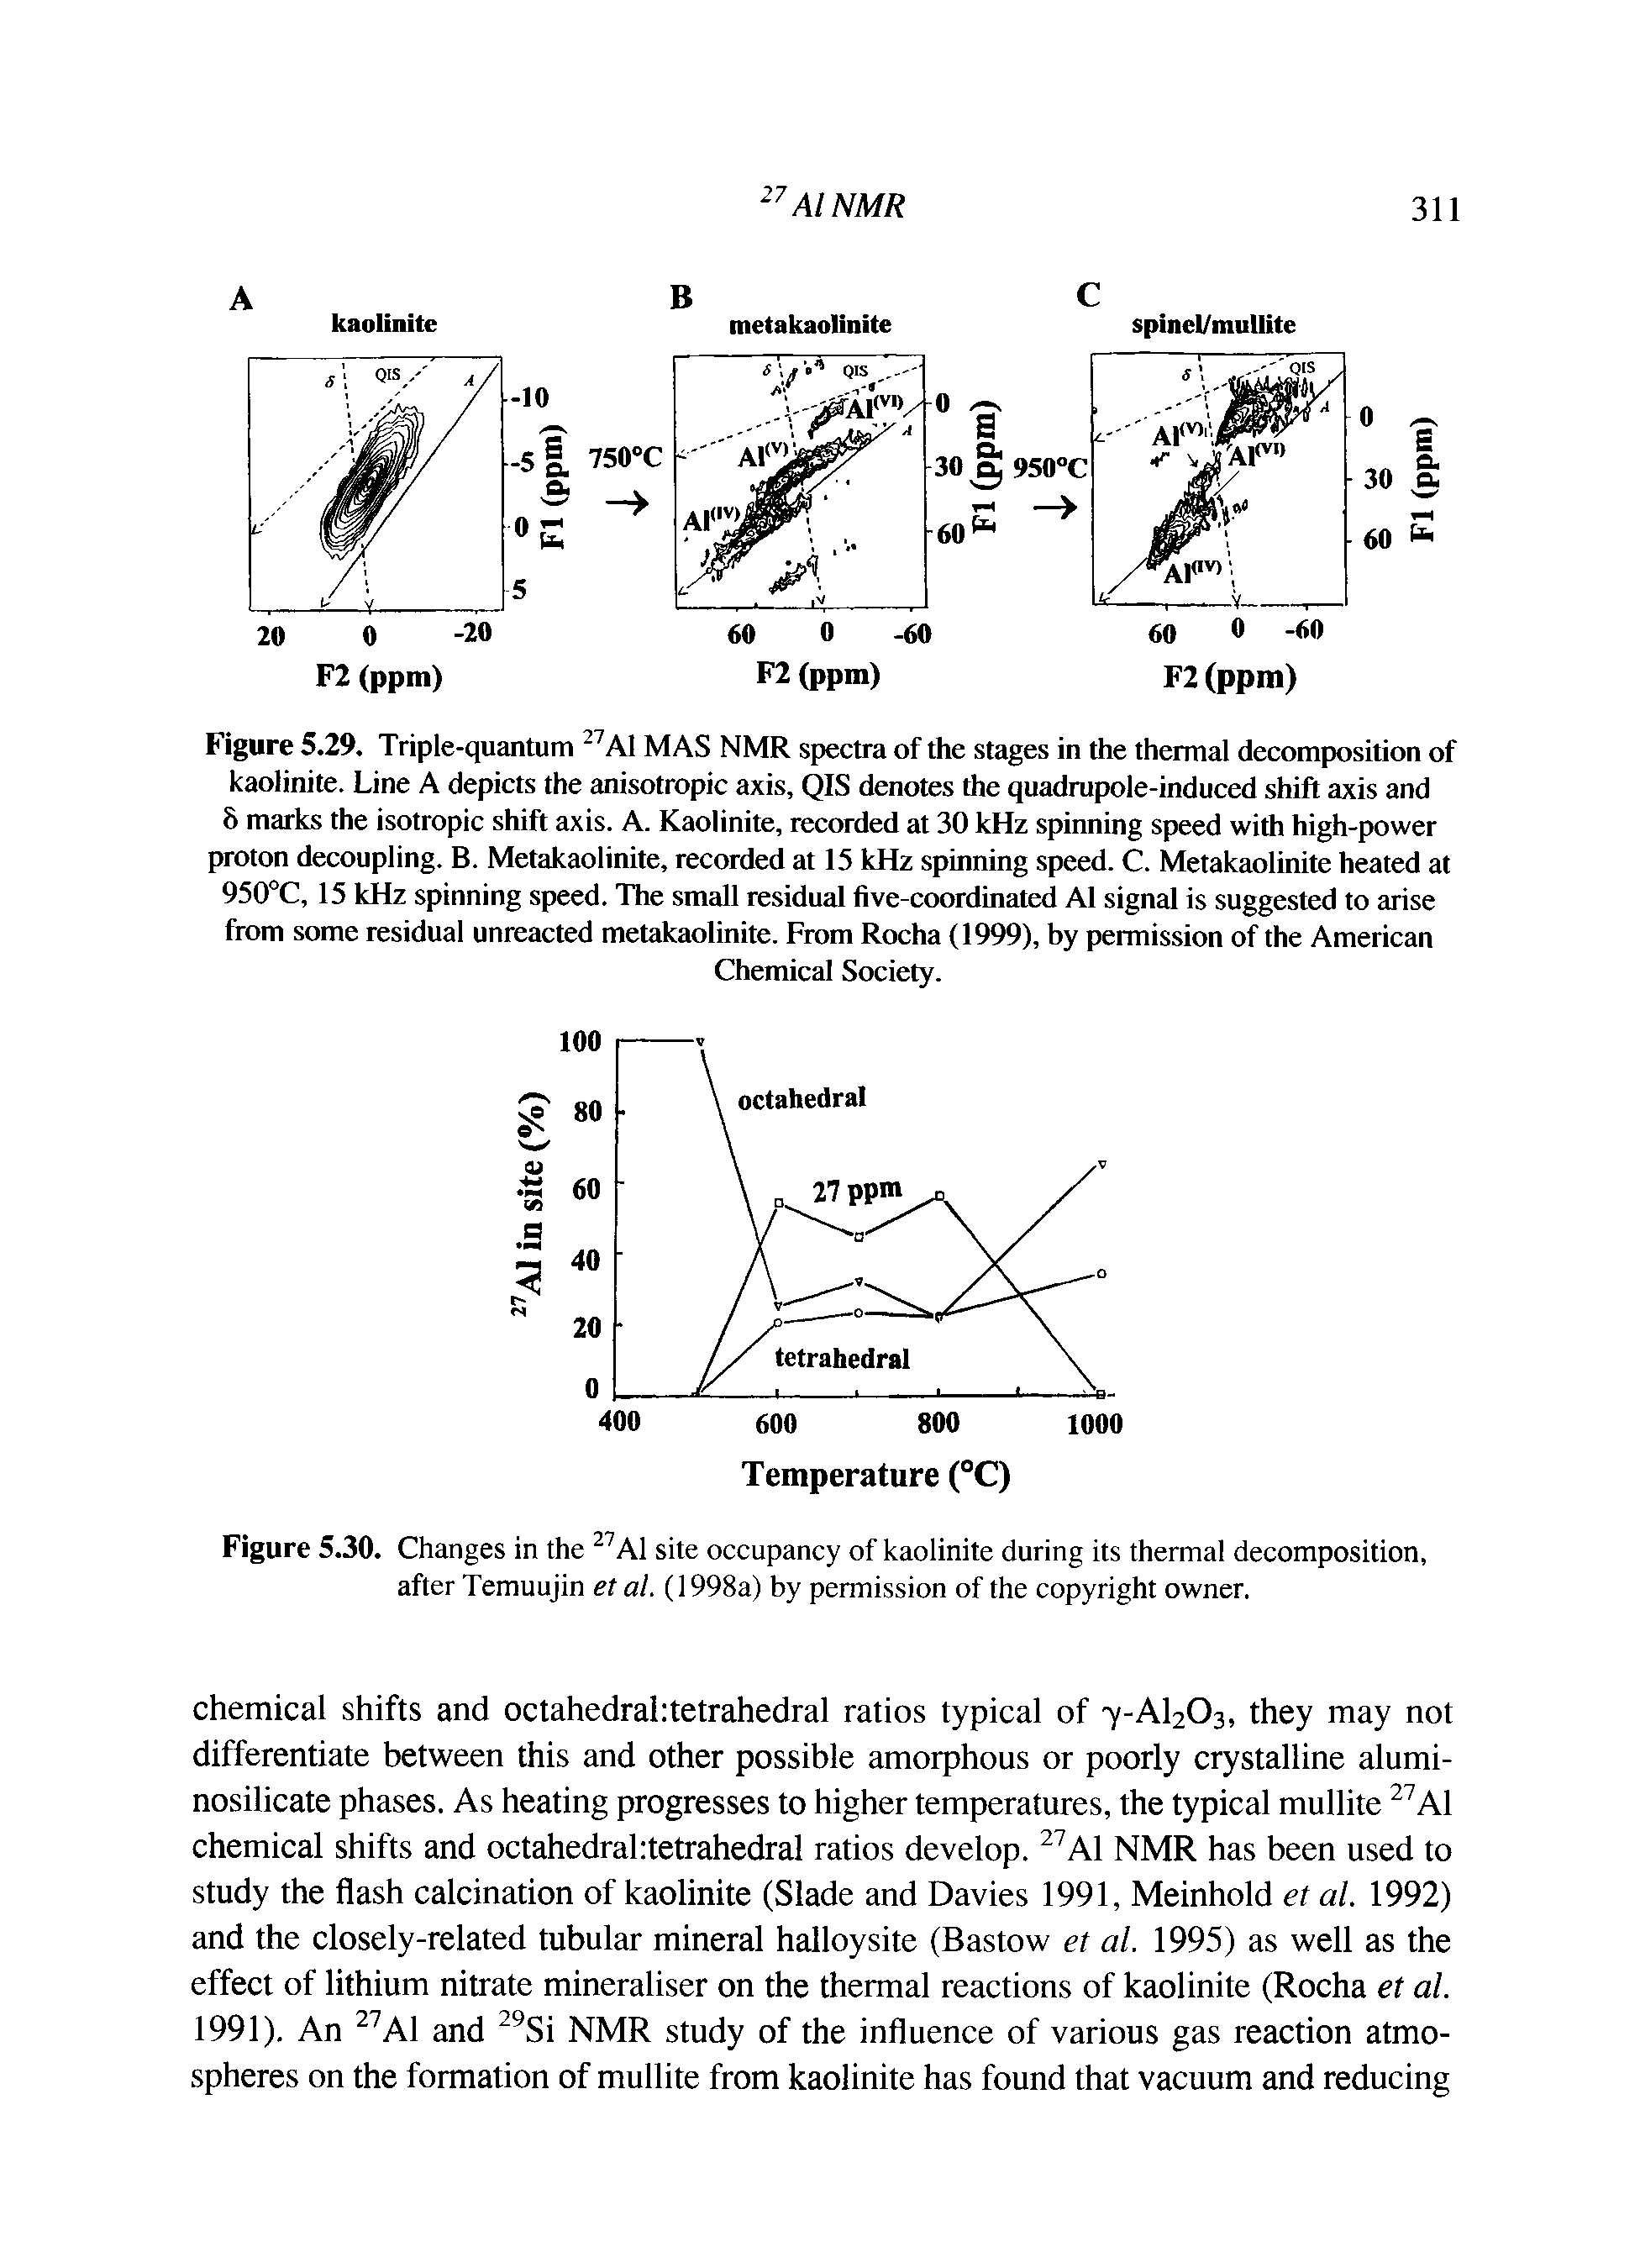 Figure 5.30. Changes in the Al site occupancy of kaolinite during its thermal decomposition, after Temuujin et al. (1998a) by permission of the copyright owner.